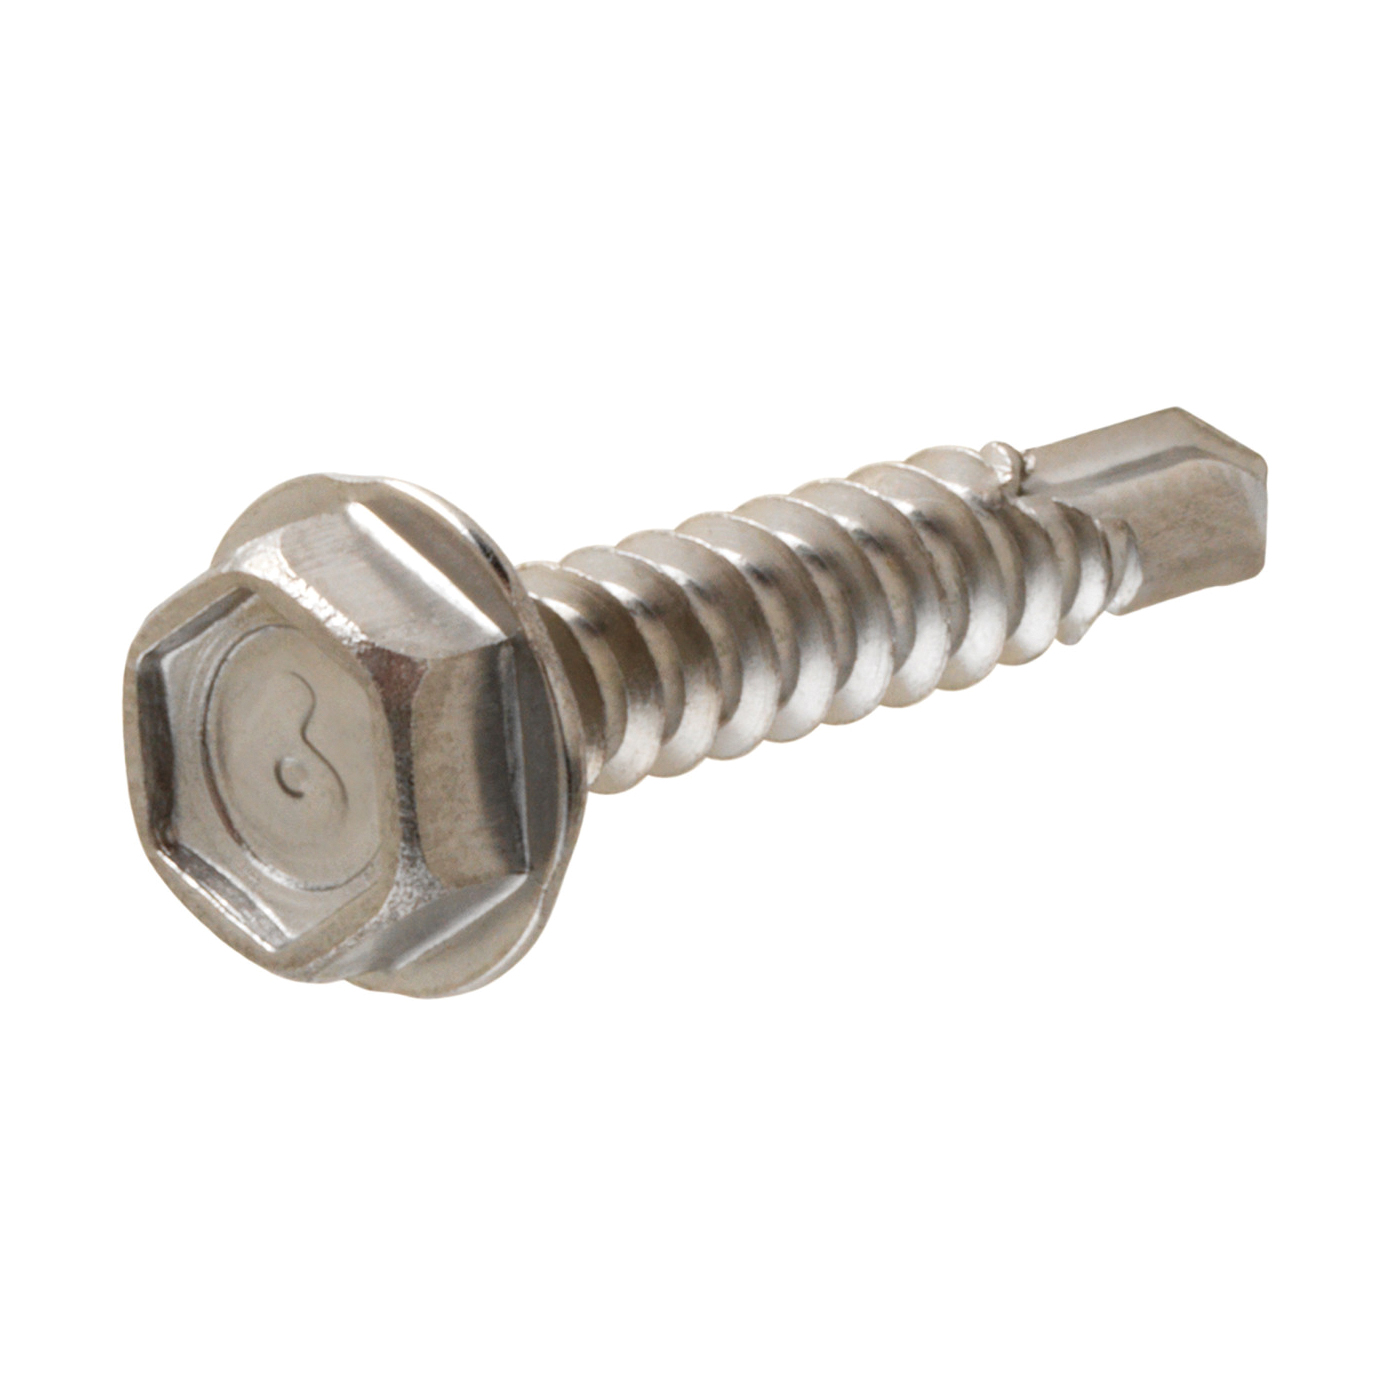 881837 Screw, #10 Thread, 3/4 in L, Coarse Thread, Washer Head, Hex Drive, Self-Drilling Point, Stainless Steel